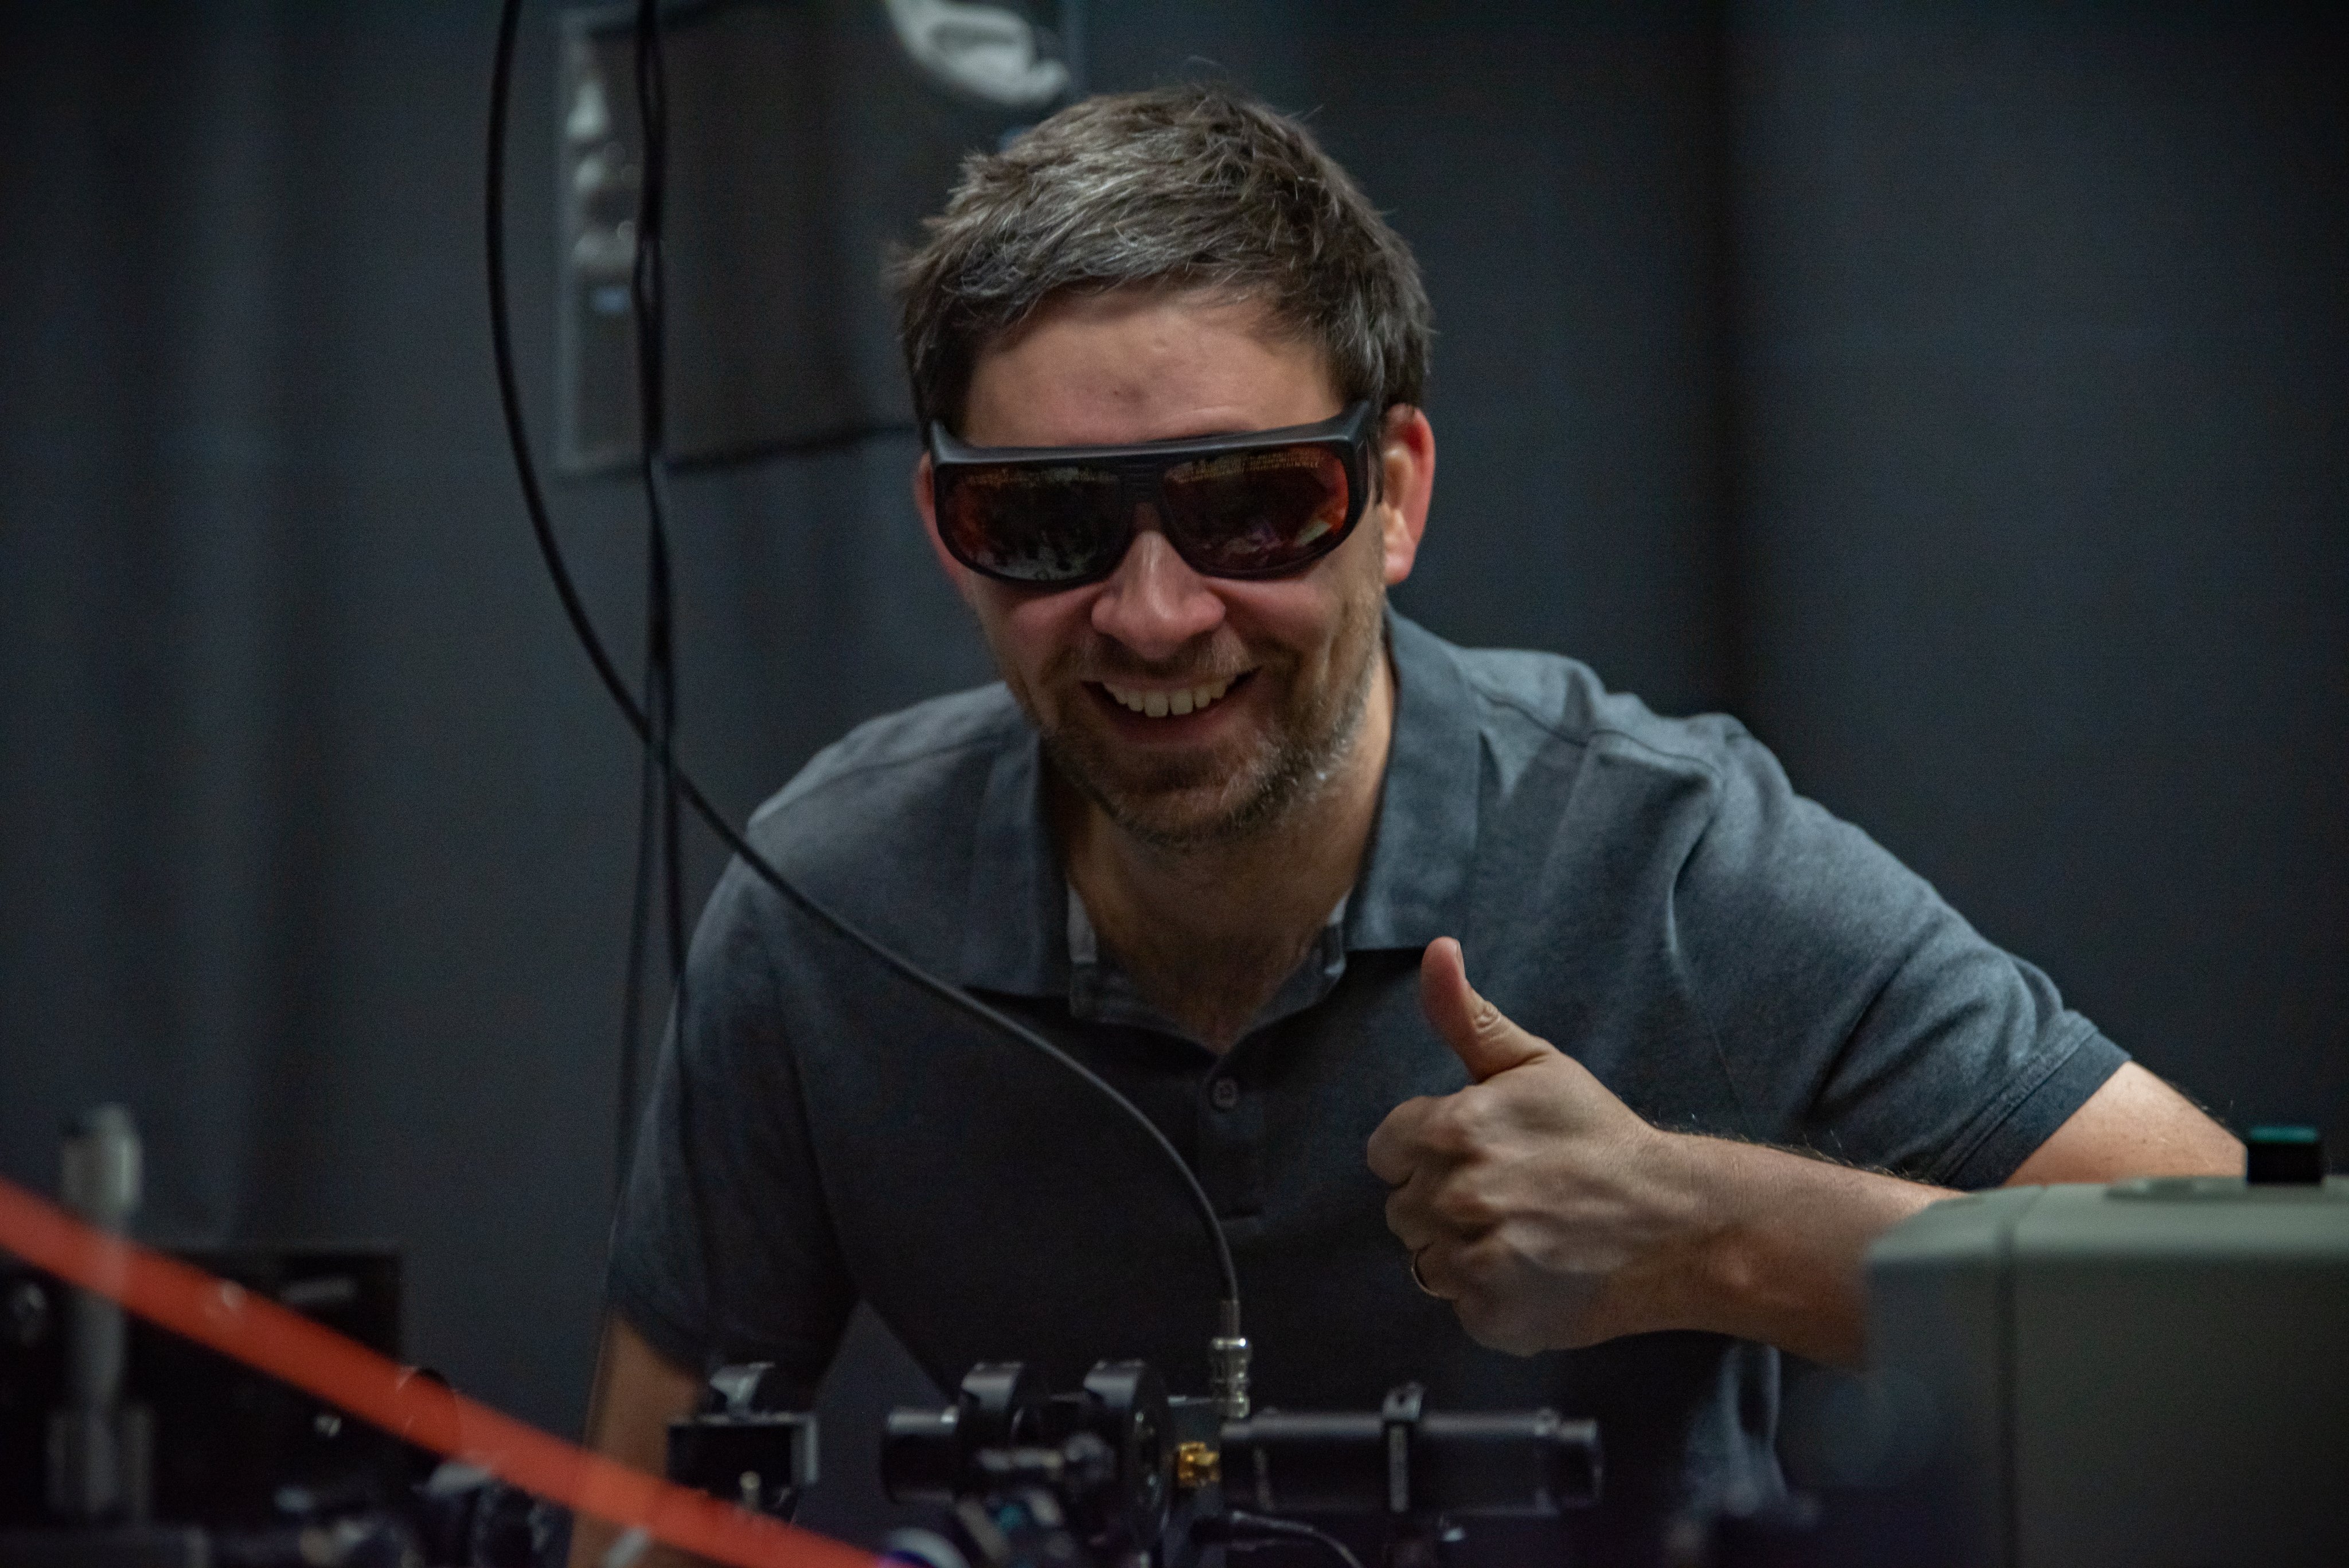 Man wearing safety glasses in a laboratory setting smiles and holds a thumbs up.